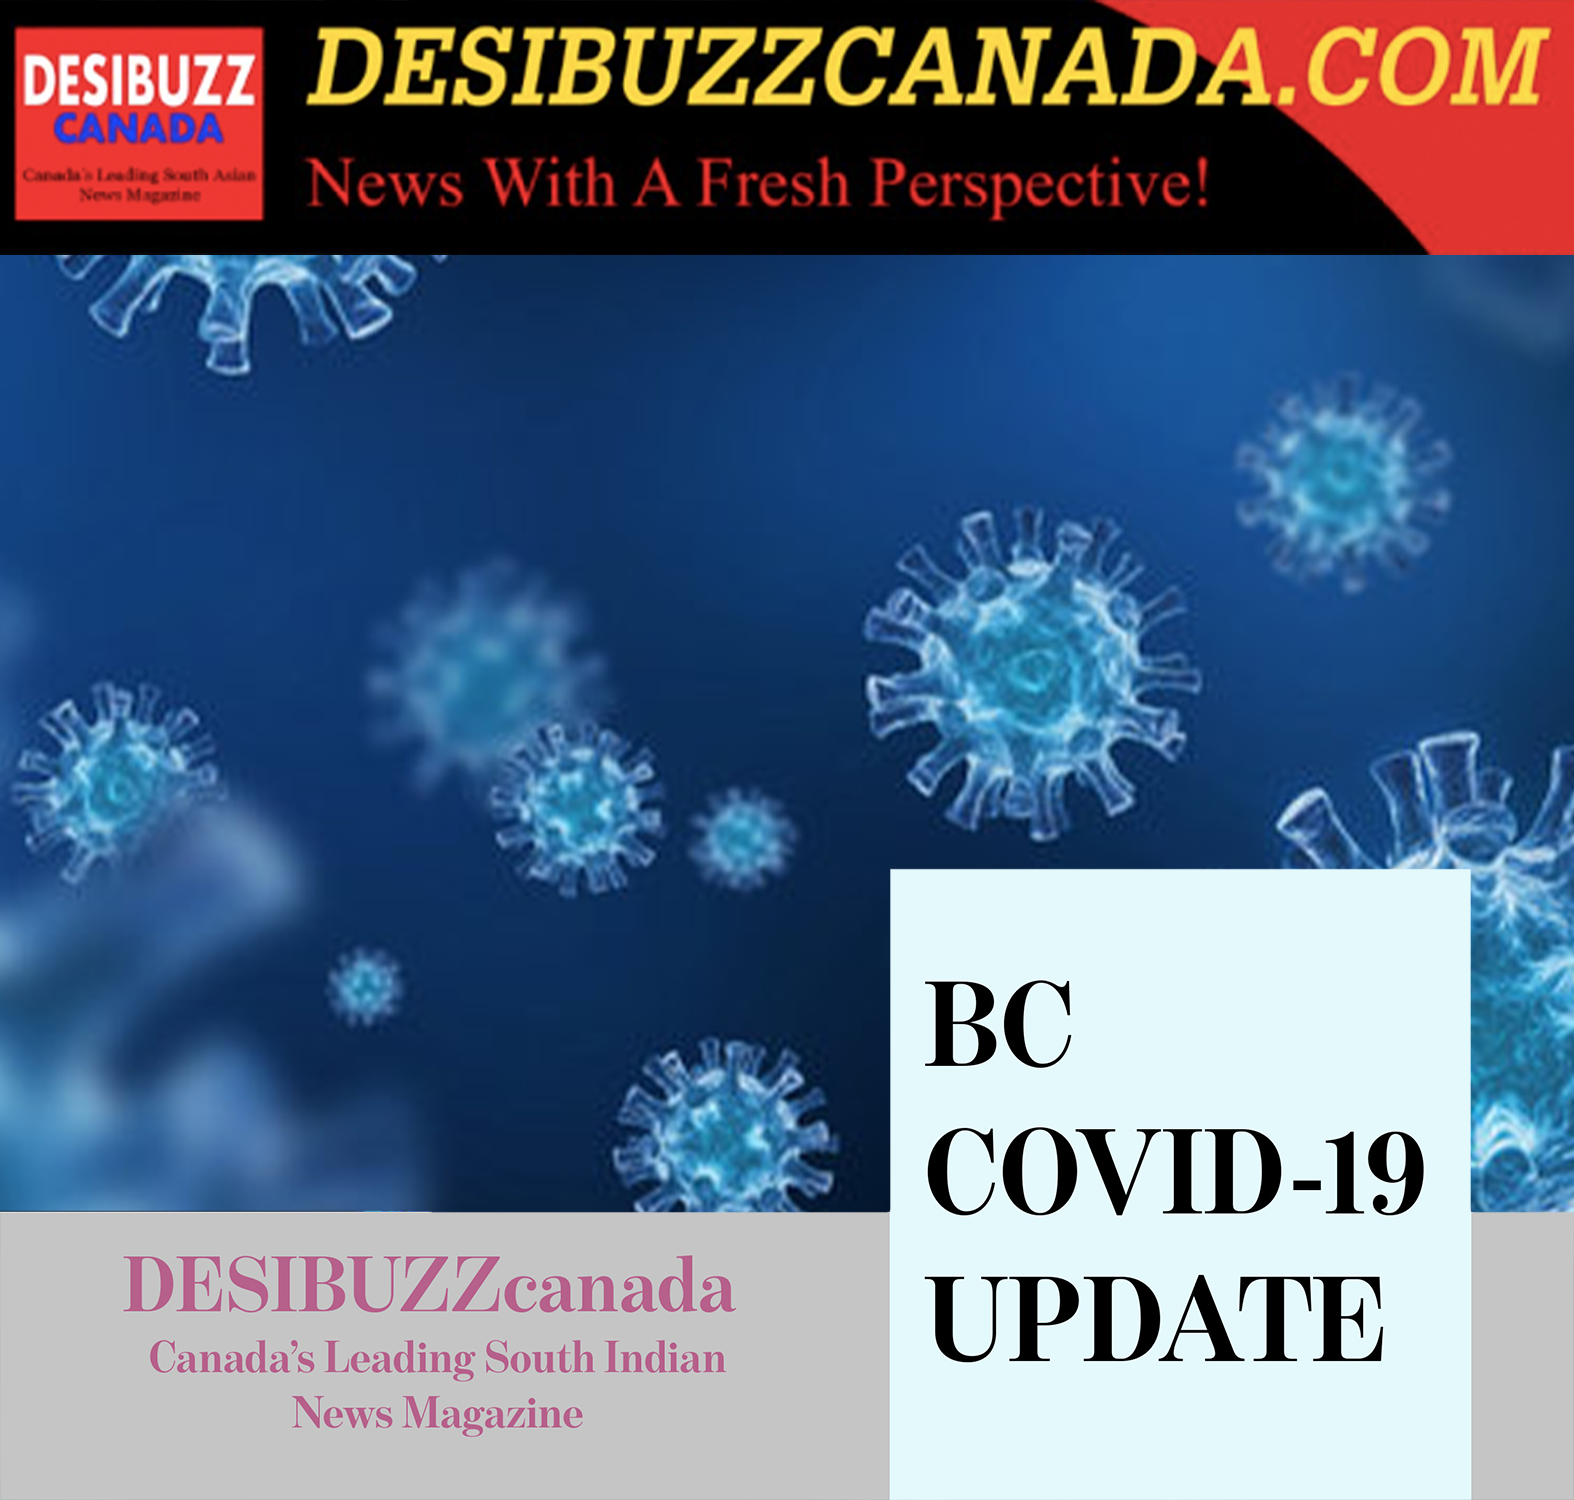 BC COVID-19 UPDATE: Deaths Rise To 13 On Thursday With Nearly 400 Cases